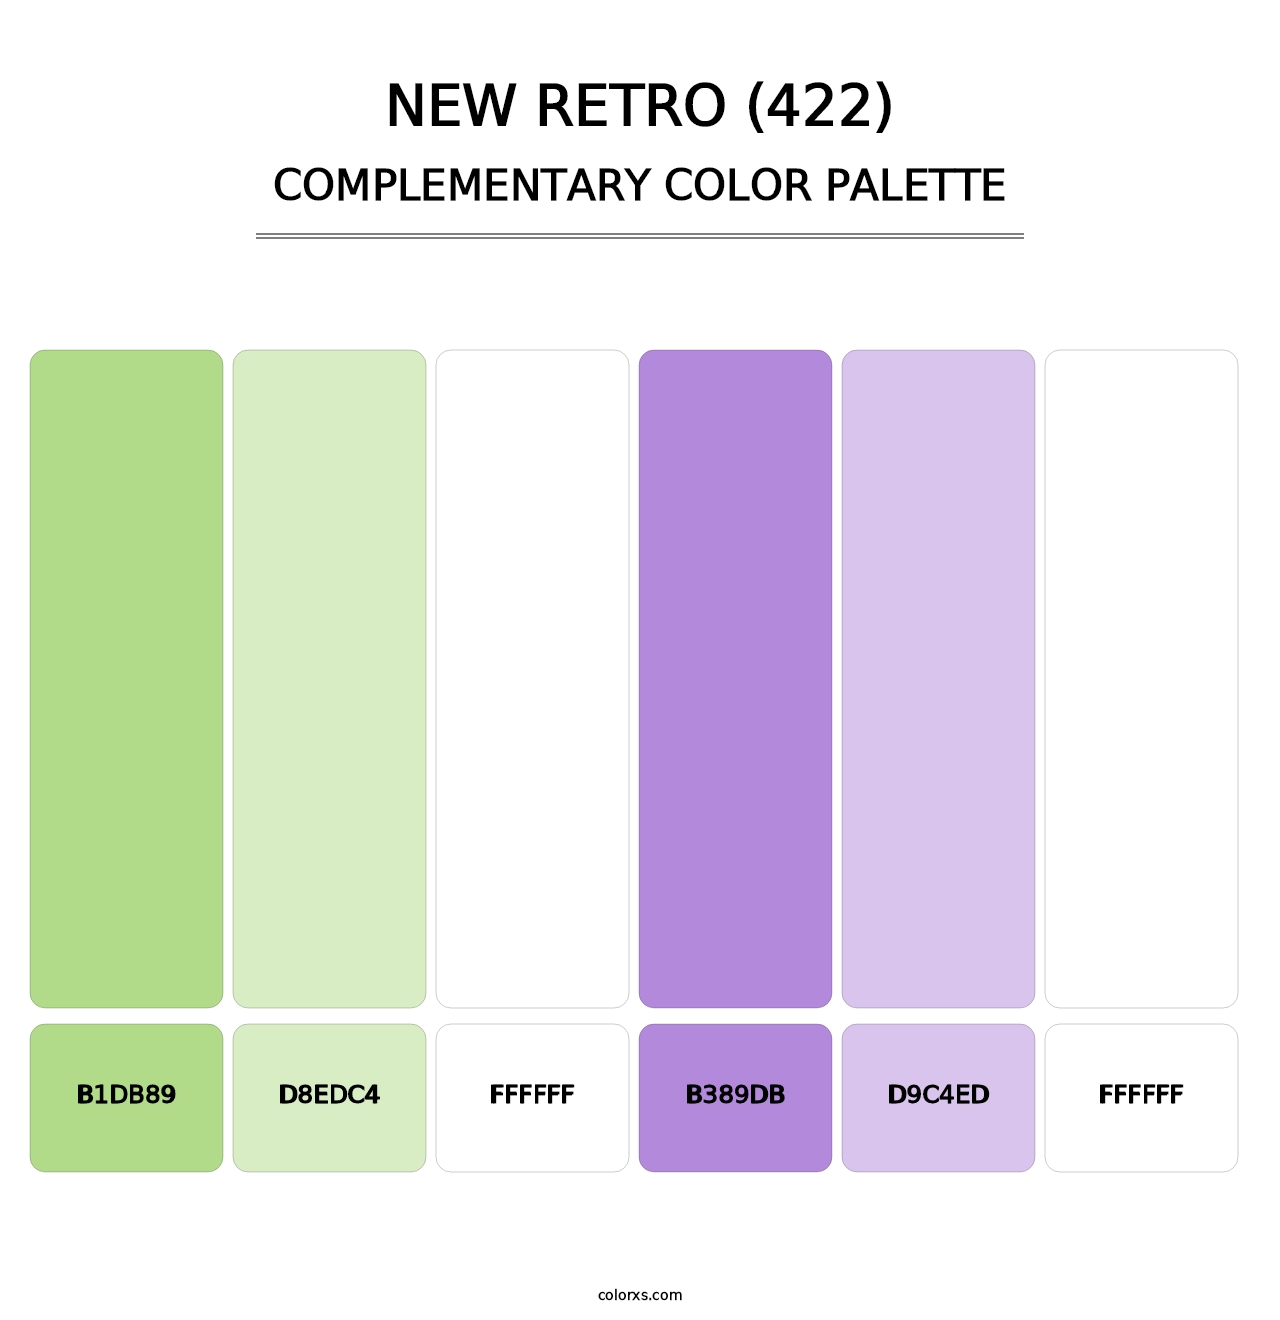 New Retro (422) - Complementary Color Palette